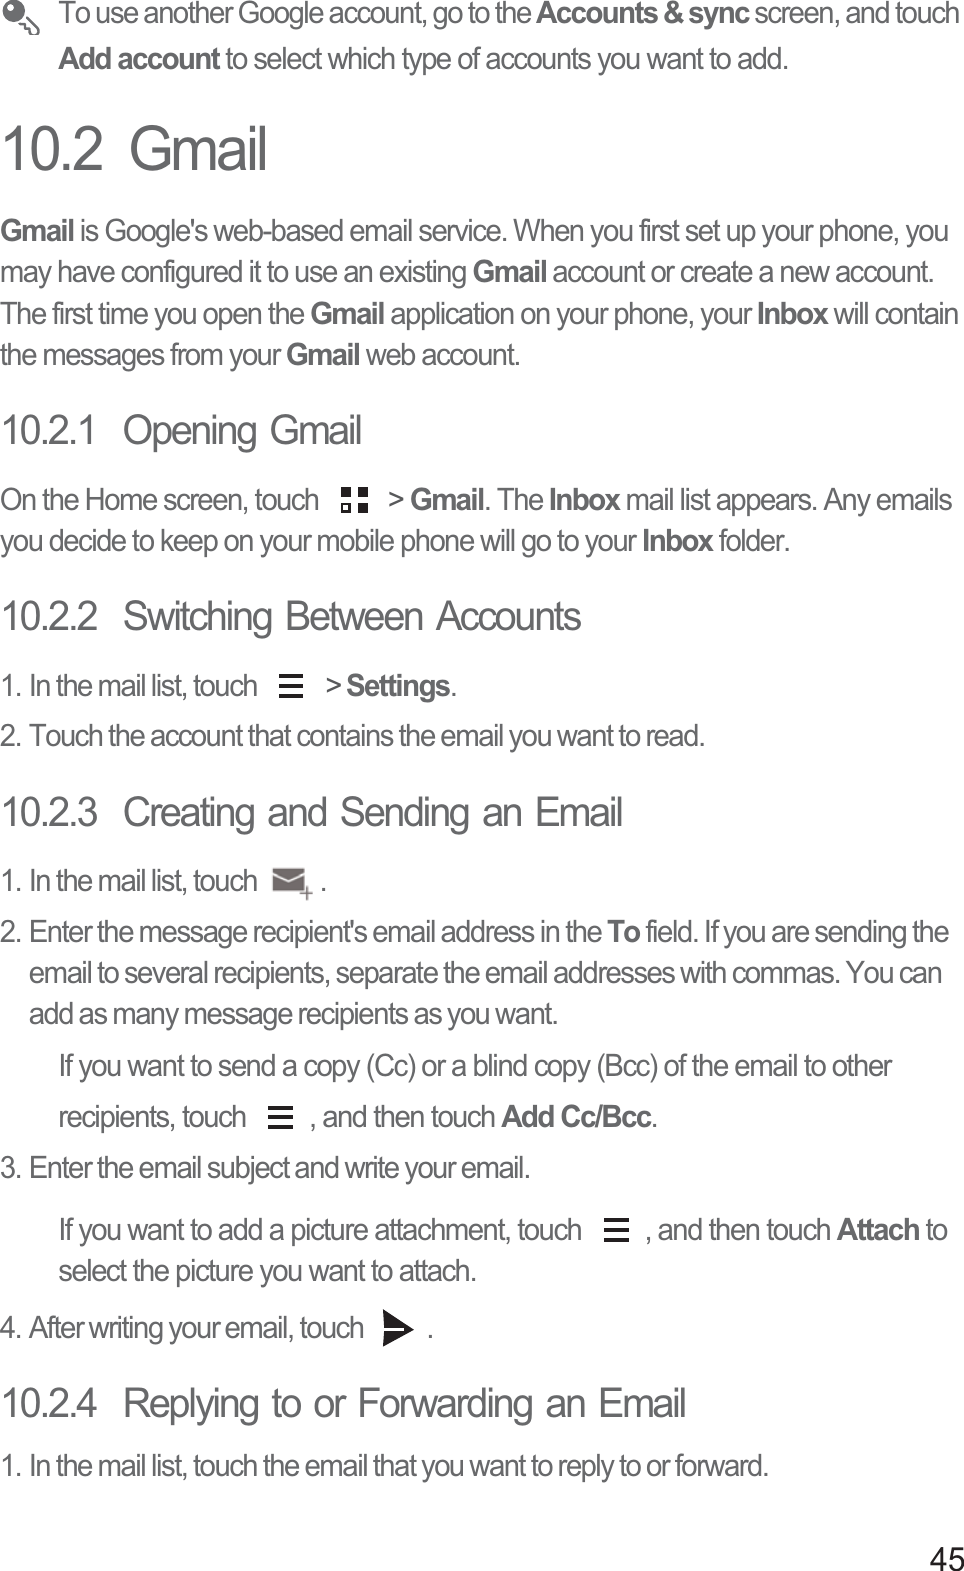 45 To use another Google account, go to the Accounts &amp; sync screen, and touch Add account to select which type of accounts you want to add.10.2  GmailGmail is Google&apos;s web-based email service. When you first set up your phone, you may have configured it to use an existing Gmail account or create a new account. The first time you open the Gmail application on your phone, your Inbox will contain the messages from your Gmail web account.10.2.1  Opening GmailOn the Home screen, touch   &gt; Gmail. The Inbox mail list appears. Any emails you decide to keep on your mobile phone will go to your Inbox folder.10.2.2  Switching Between Accounts1. In the mail list, touch   &gt; Settings.2. Touch the account that contains the email you want to read.10.2.3  Creating and Sending an Email1. In the mail list, touch  .2. Enter the message recipient&apos;s email address in the To field. If you are sending the email to several recipients, separate the email addresses with commas. You can add as many message recipients as you want.If you want to send a copy (Cc) or a blind copy (Bcc) of the email to other recipients, touch  , and then touch Add Cc/Bcc.3. Enter the email subject and write your email.If you want to add a picture attachment, touch  , and then touch Attach to select the picture you want to attach.4. After writing your email, touch  .10.2.4  Replying to or Forwarding an Email1. In the mail list, touch the email that you want to reply to or forward.